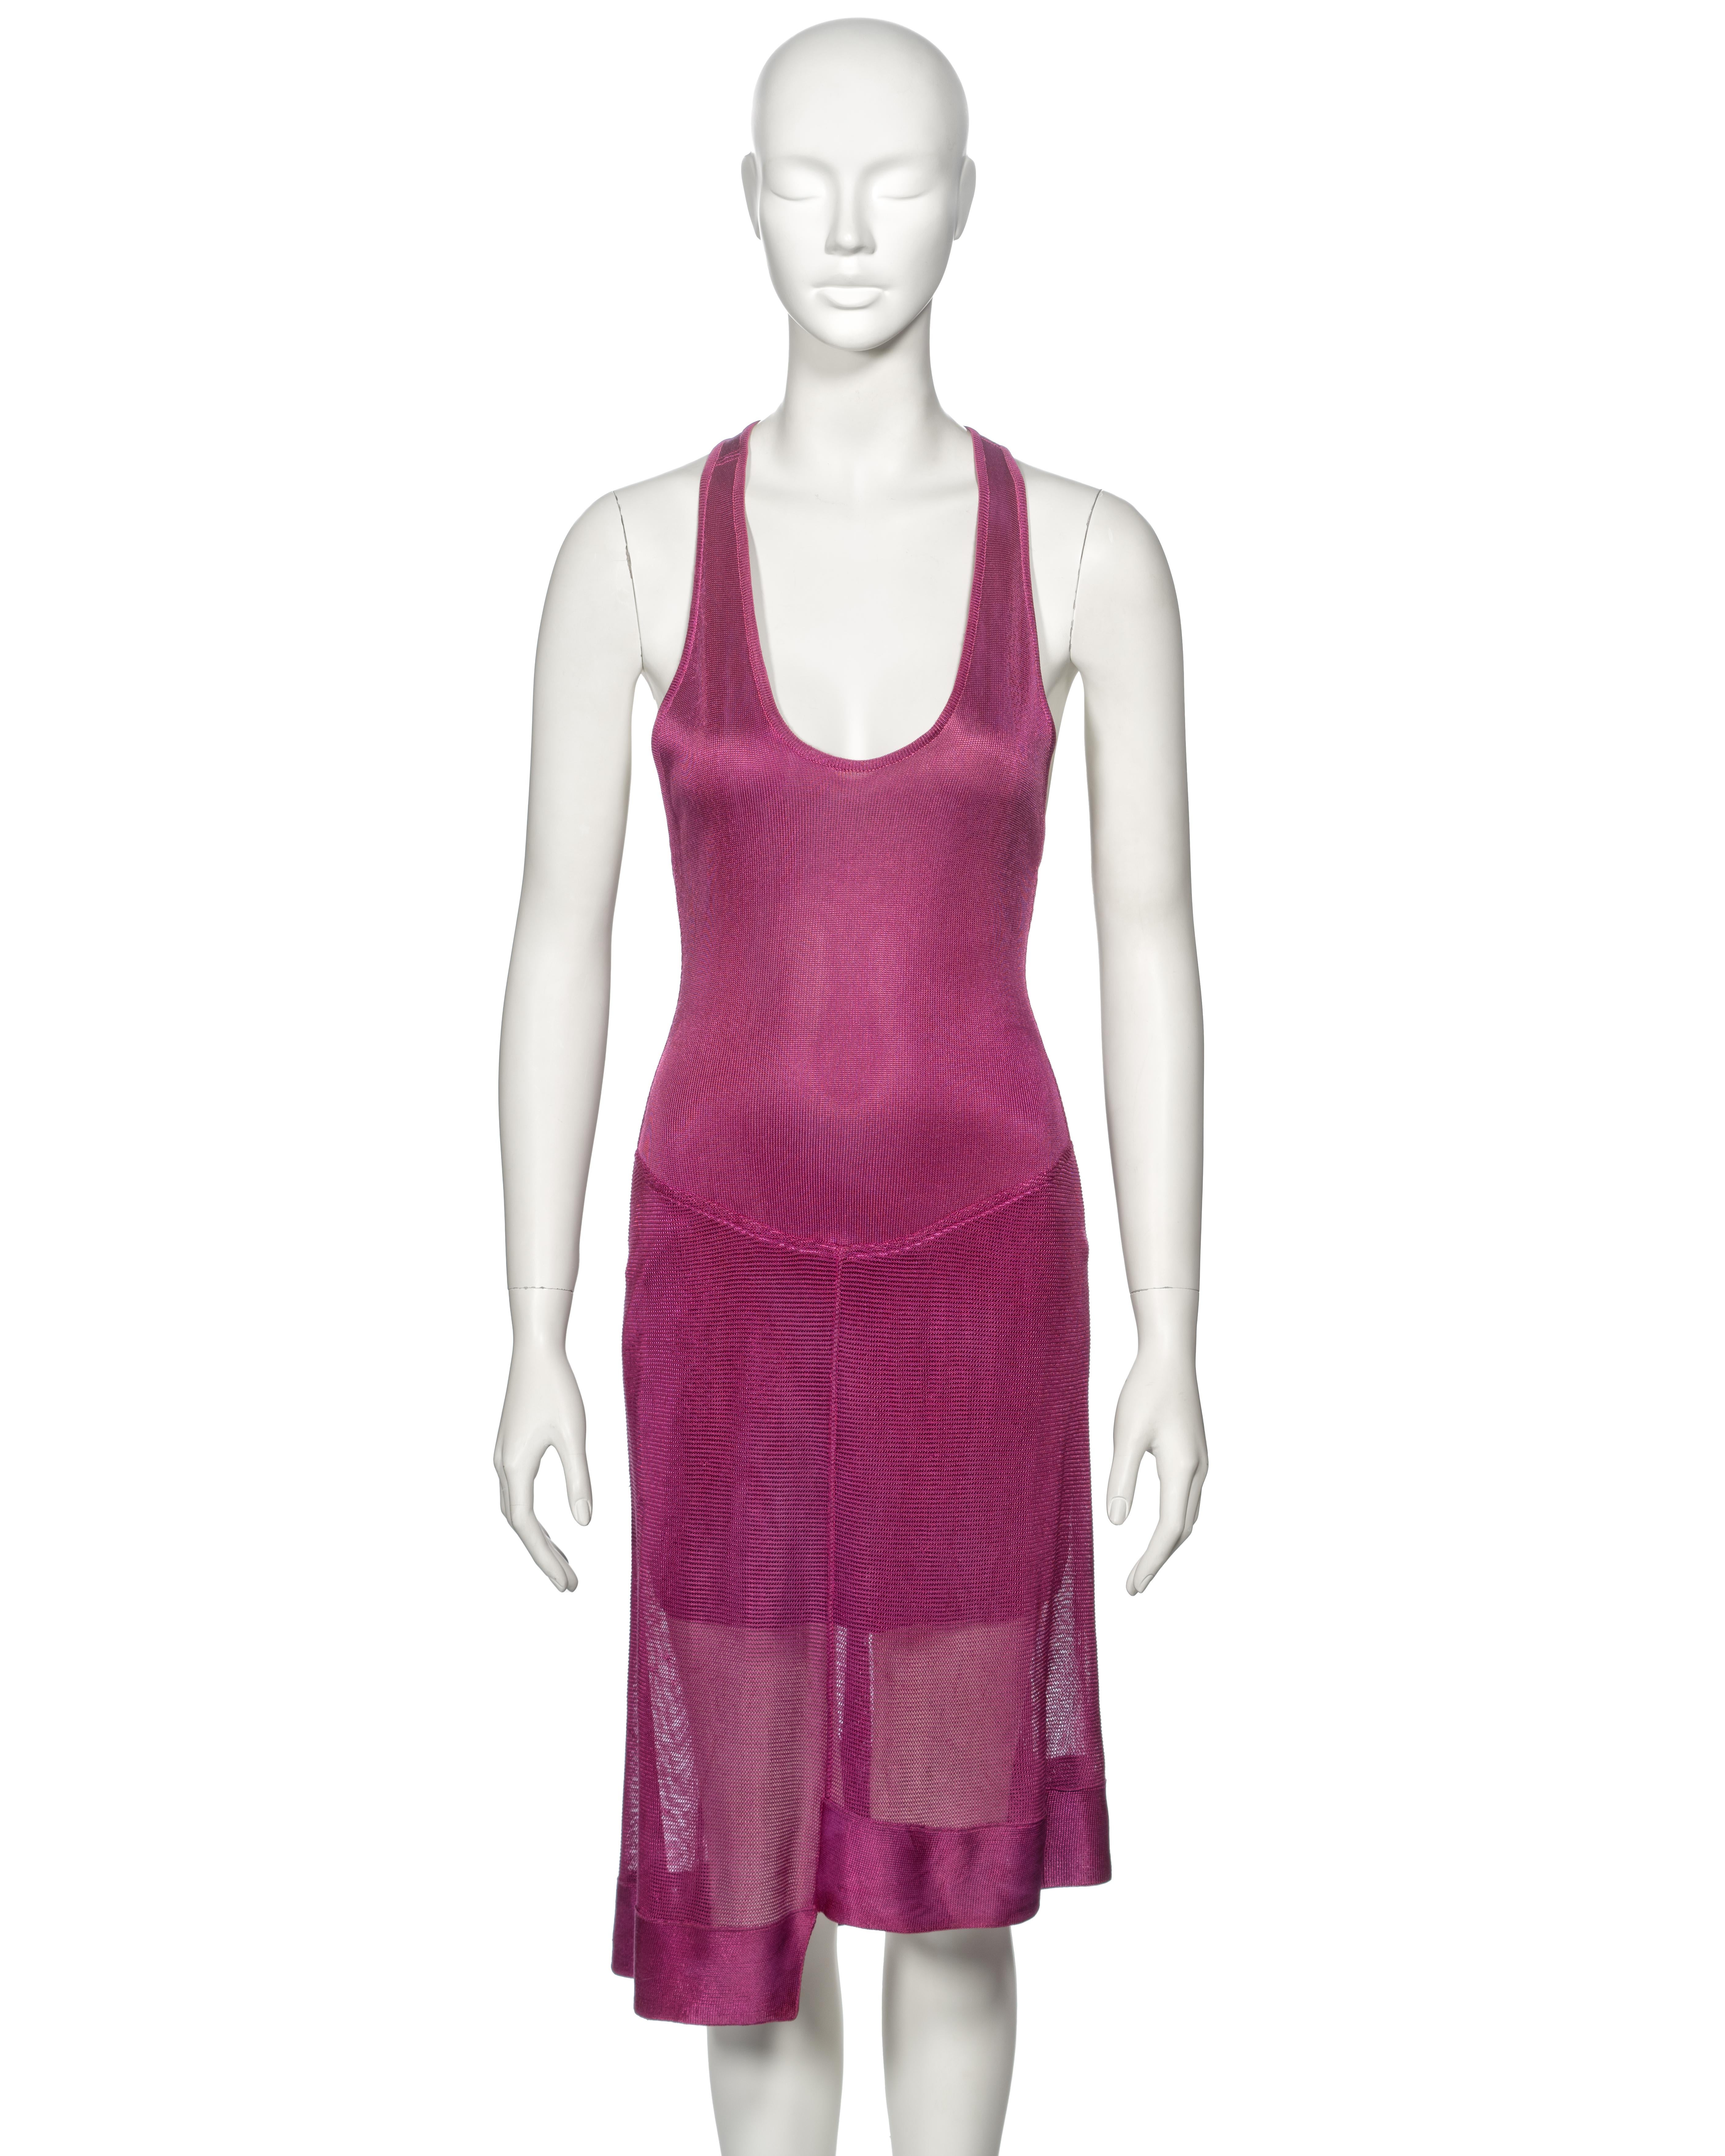 ▪ Archival Azzedine Alaia Cocktail Dress
▪ Spring-Summer 1986
▪ Sold by One of a Kind Archive
▪ Constructed from magenta acetate knit fabric 
▪ Body conscious fit 
▪ Semi-sheer knee-length skirt with irregular hemline
▪ Built-in mini skirt 
▪ Open